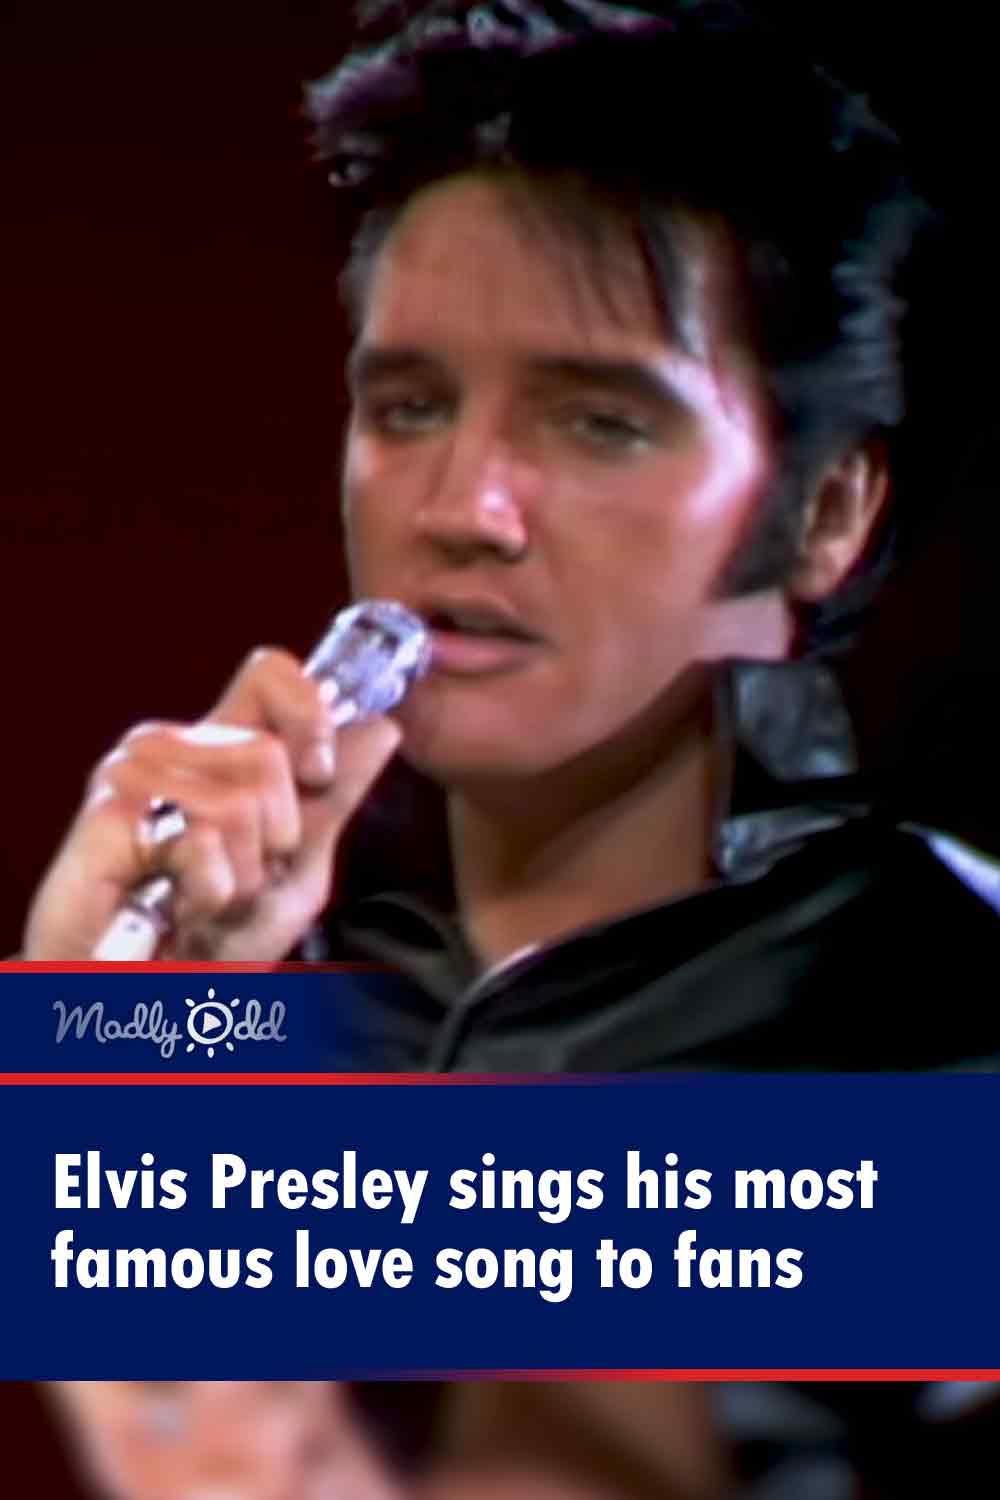 Elvis Presley sings his most famous love song to fans